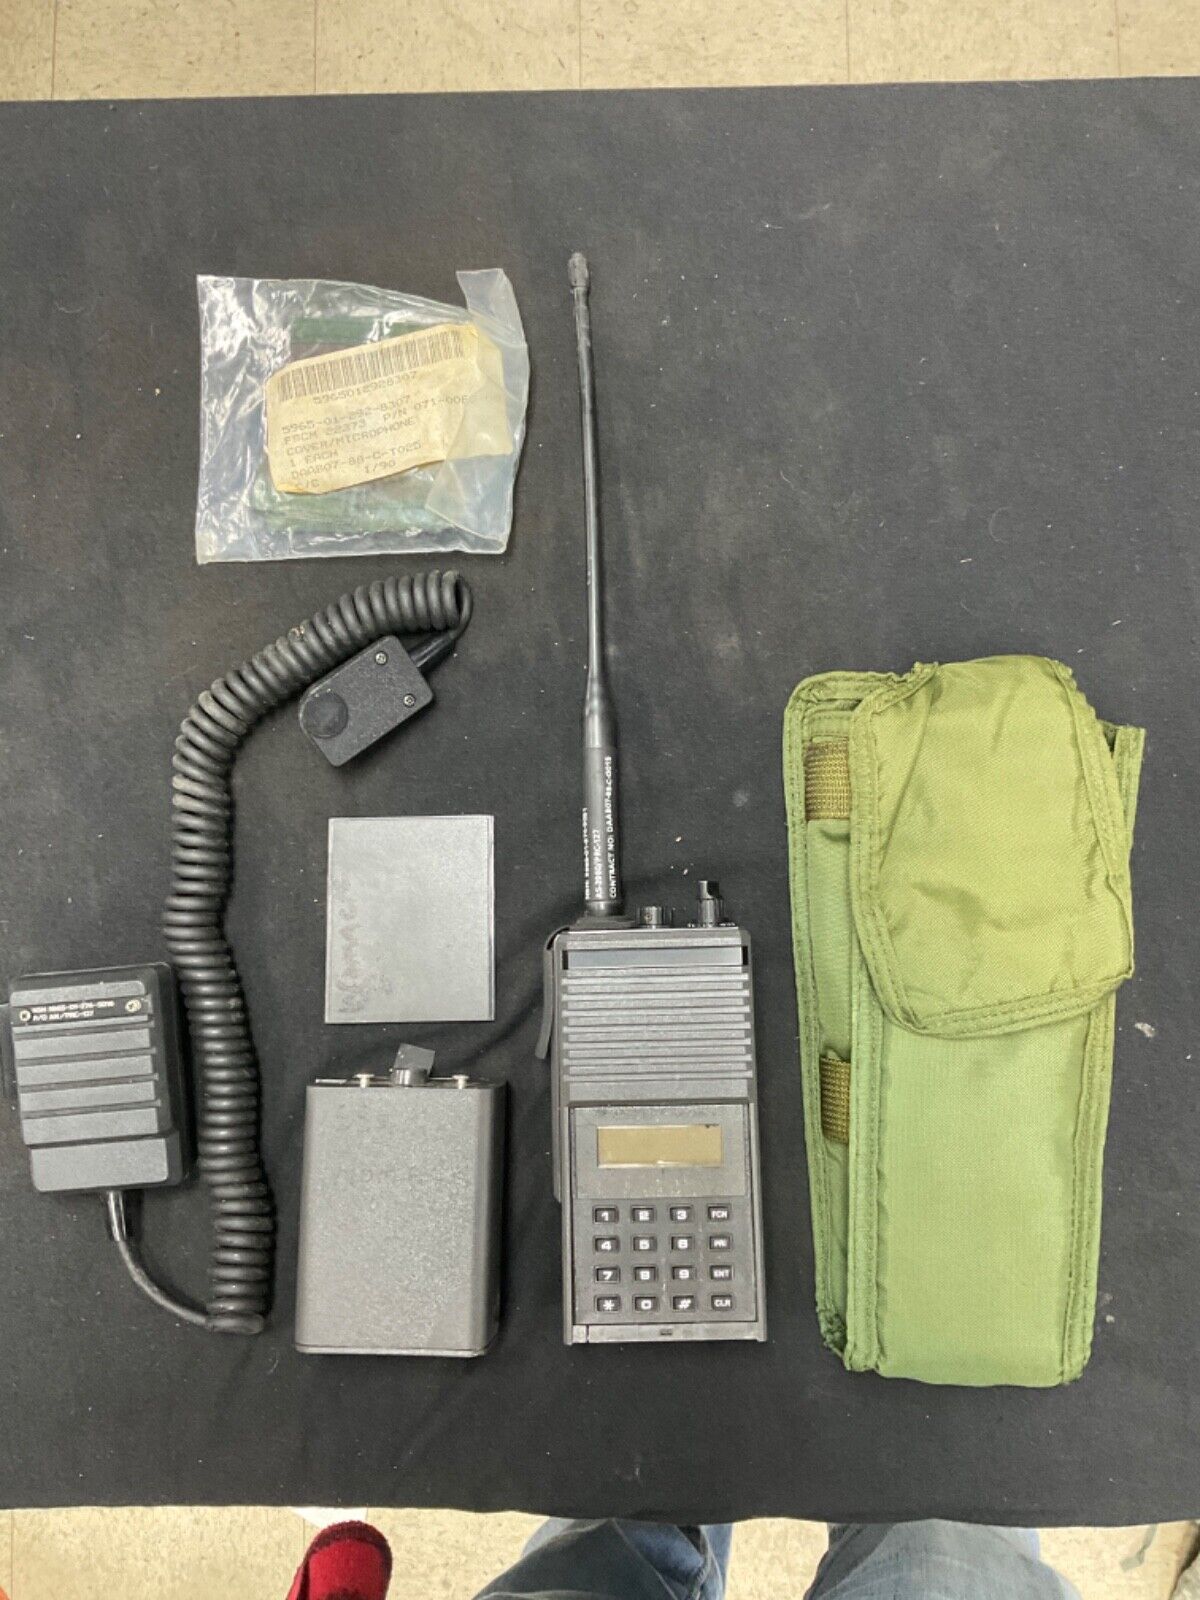 PRC-127 MILITARY RADIO WITH ACCESSORIES